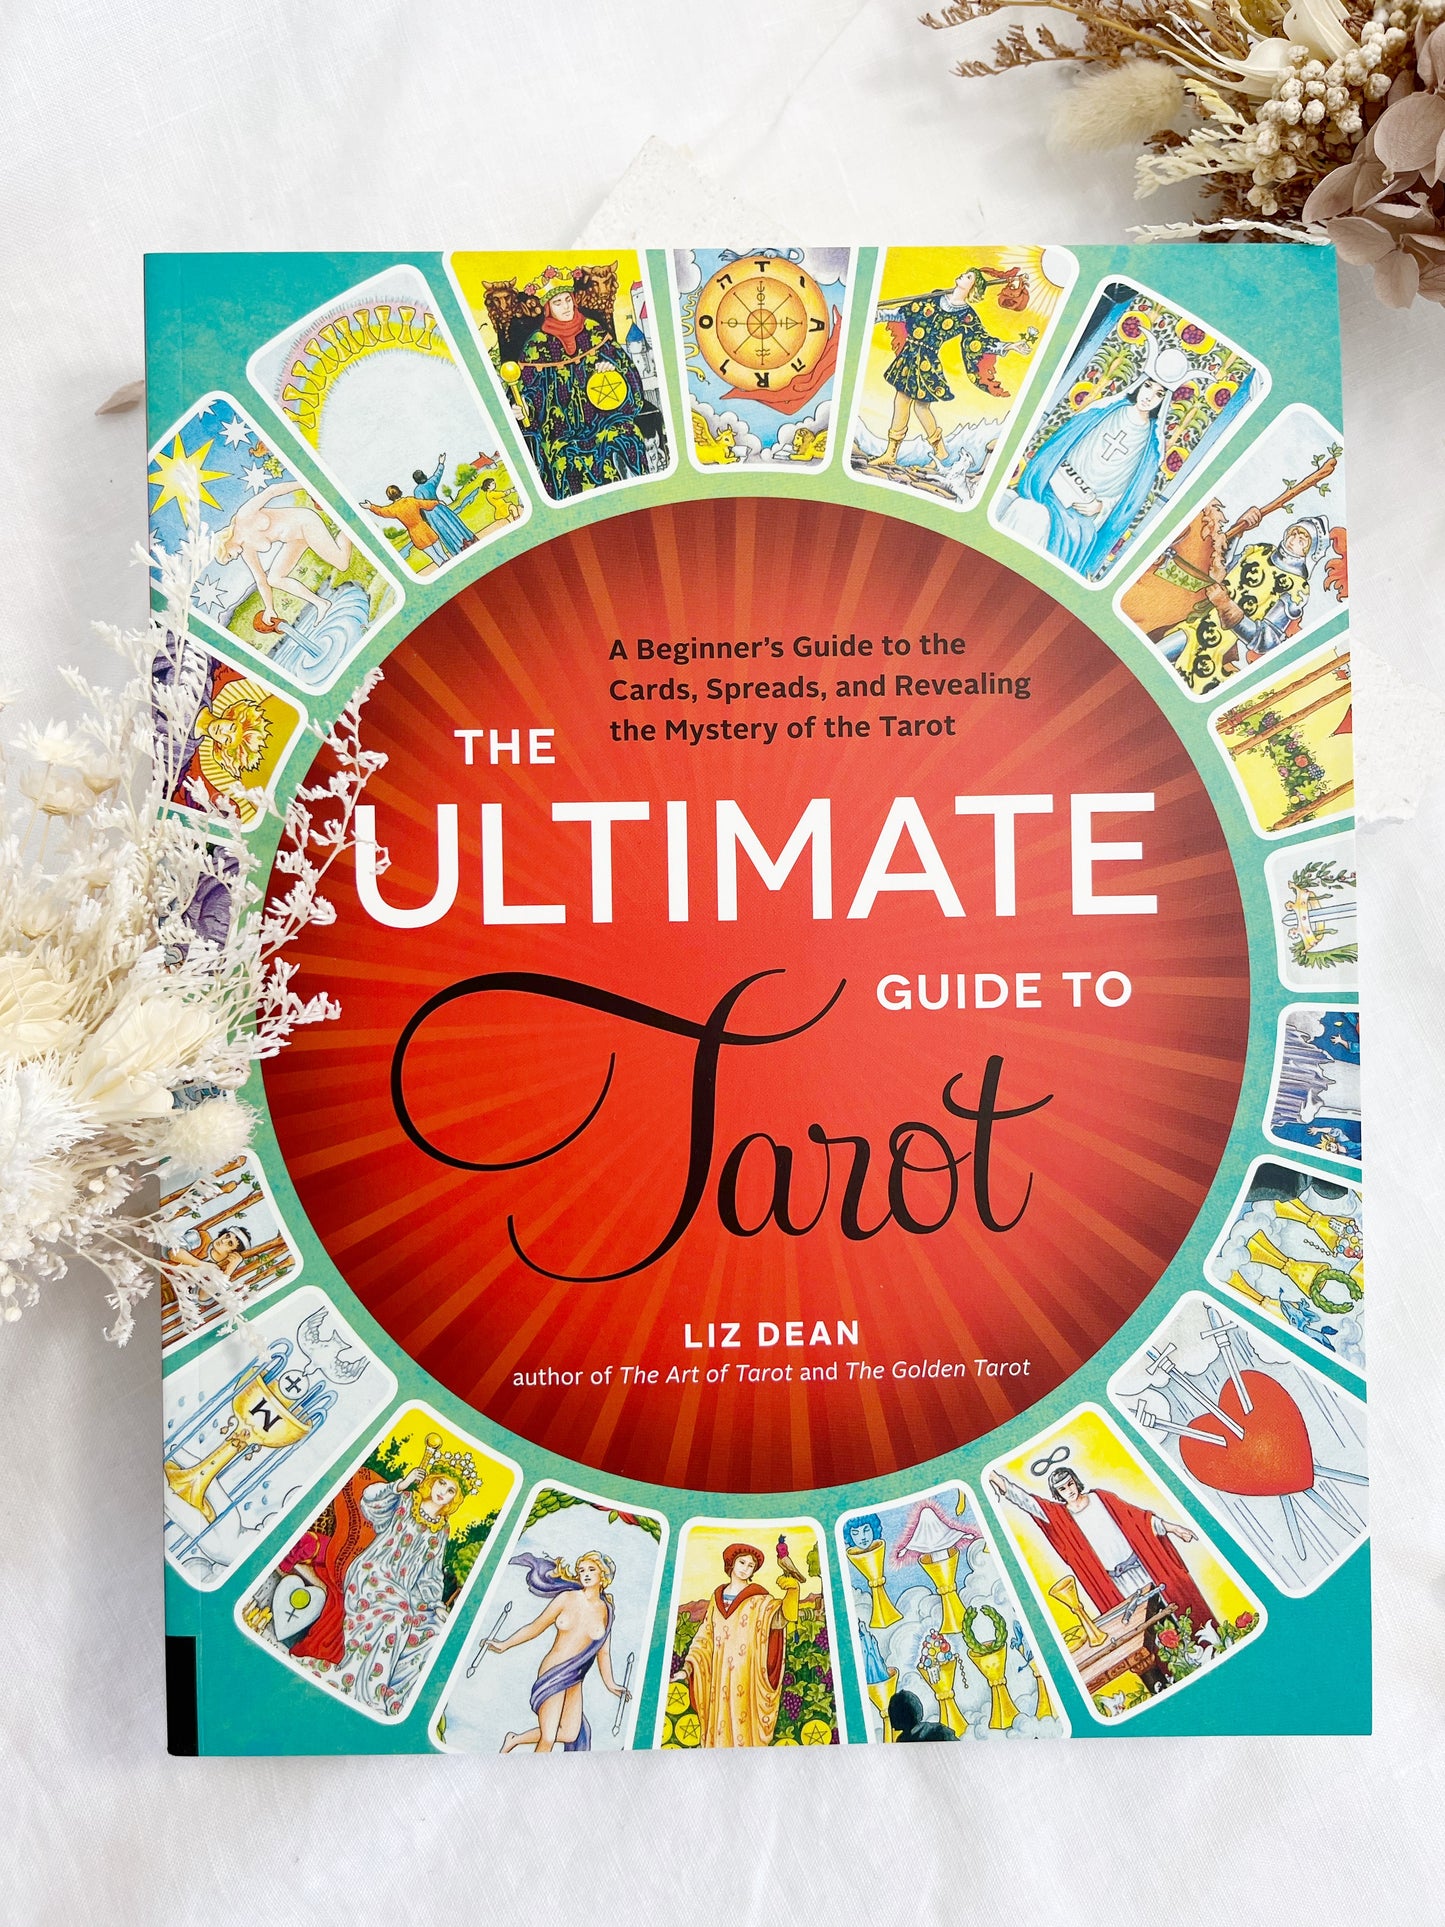 THE ULTIMATE GUIDE TO TAROT | A BEGINNERS GUIDE